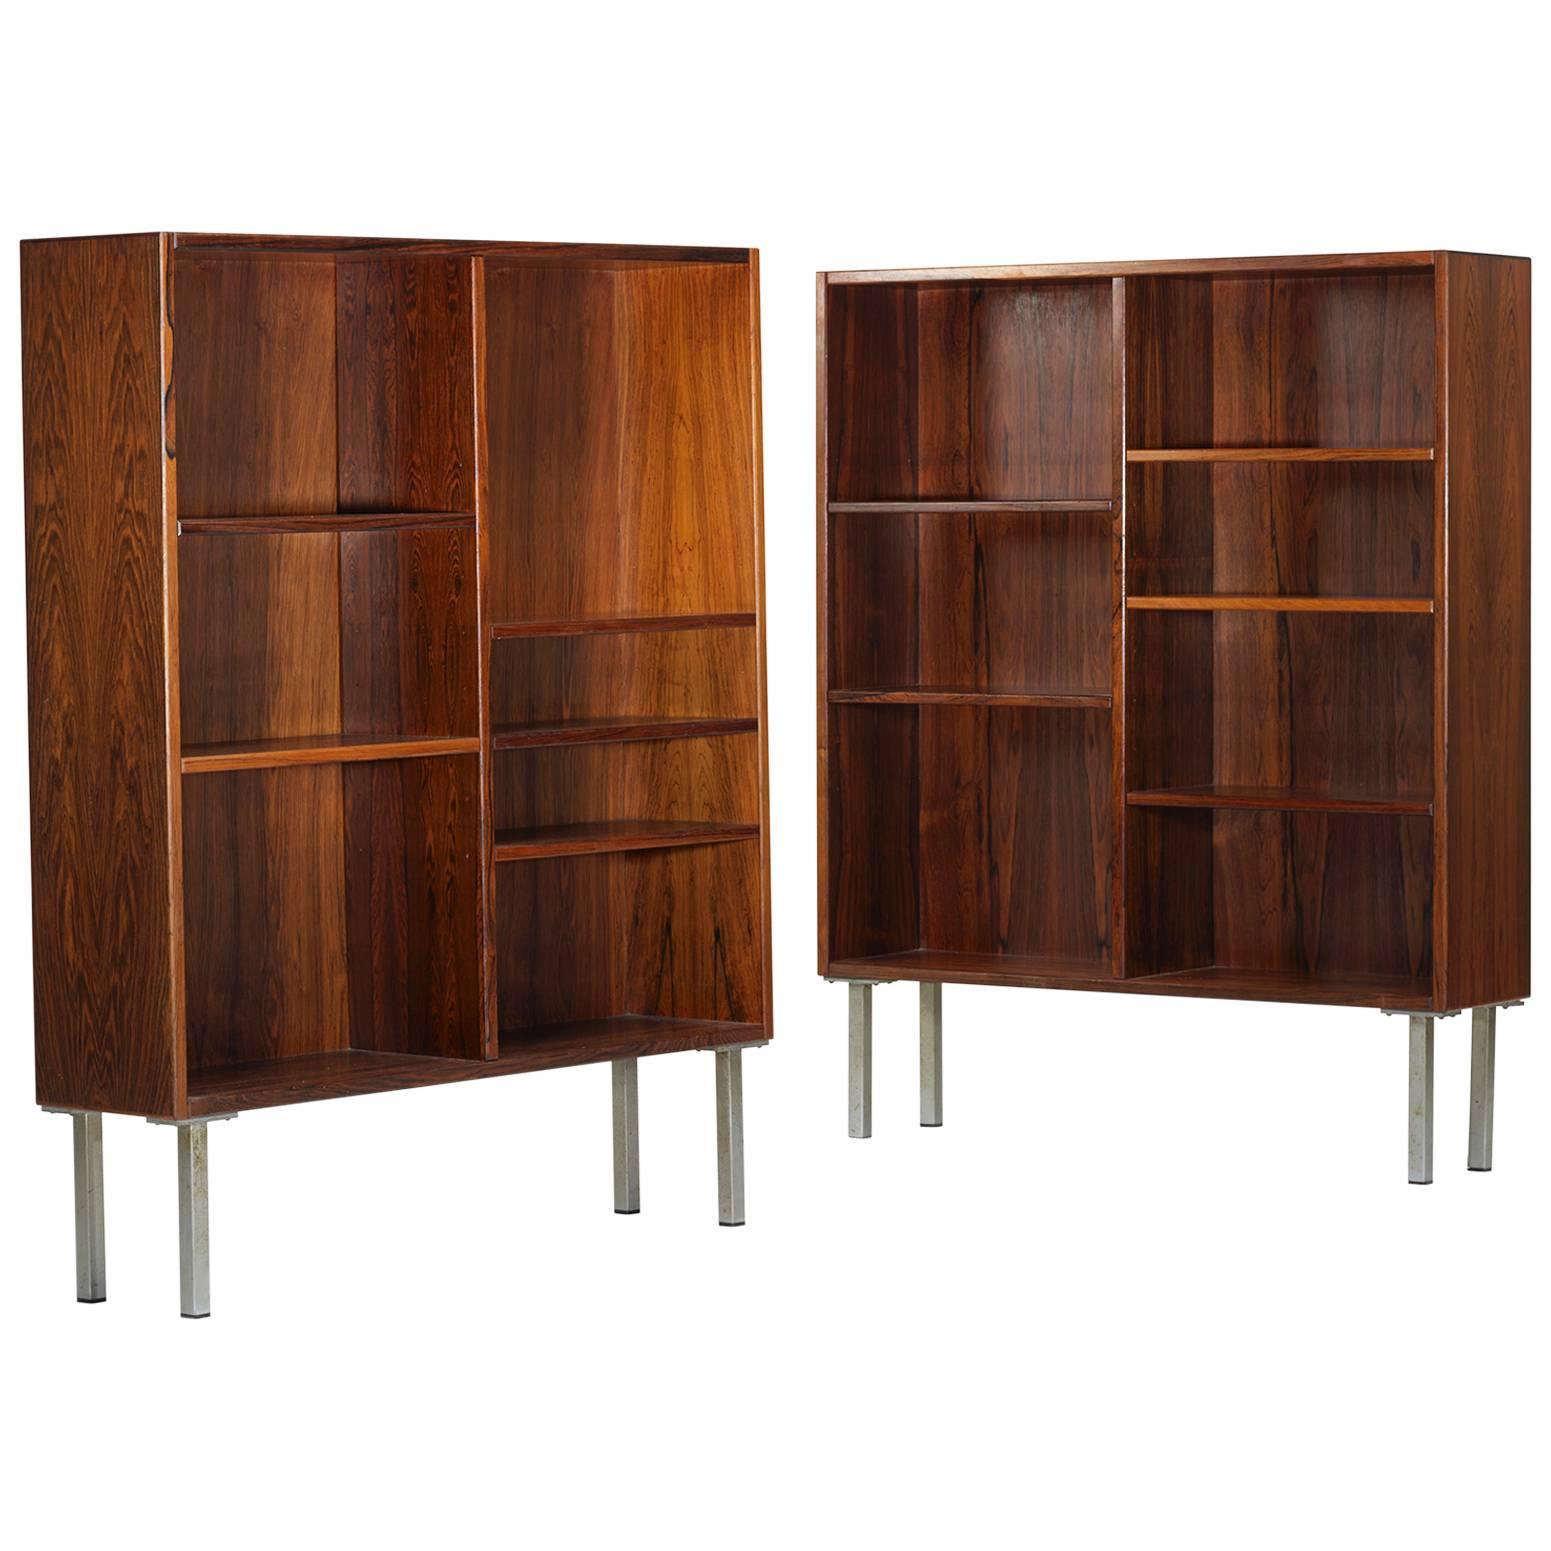 Adjustable Bookcases by Poul Hundevad